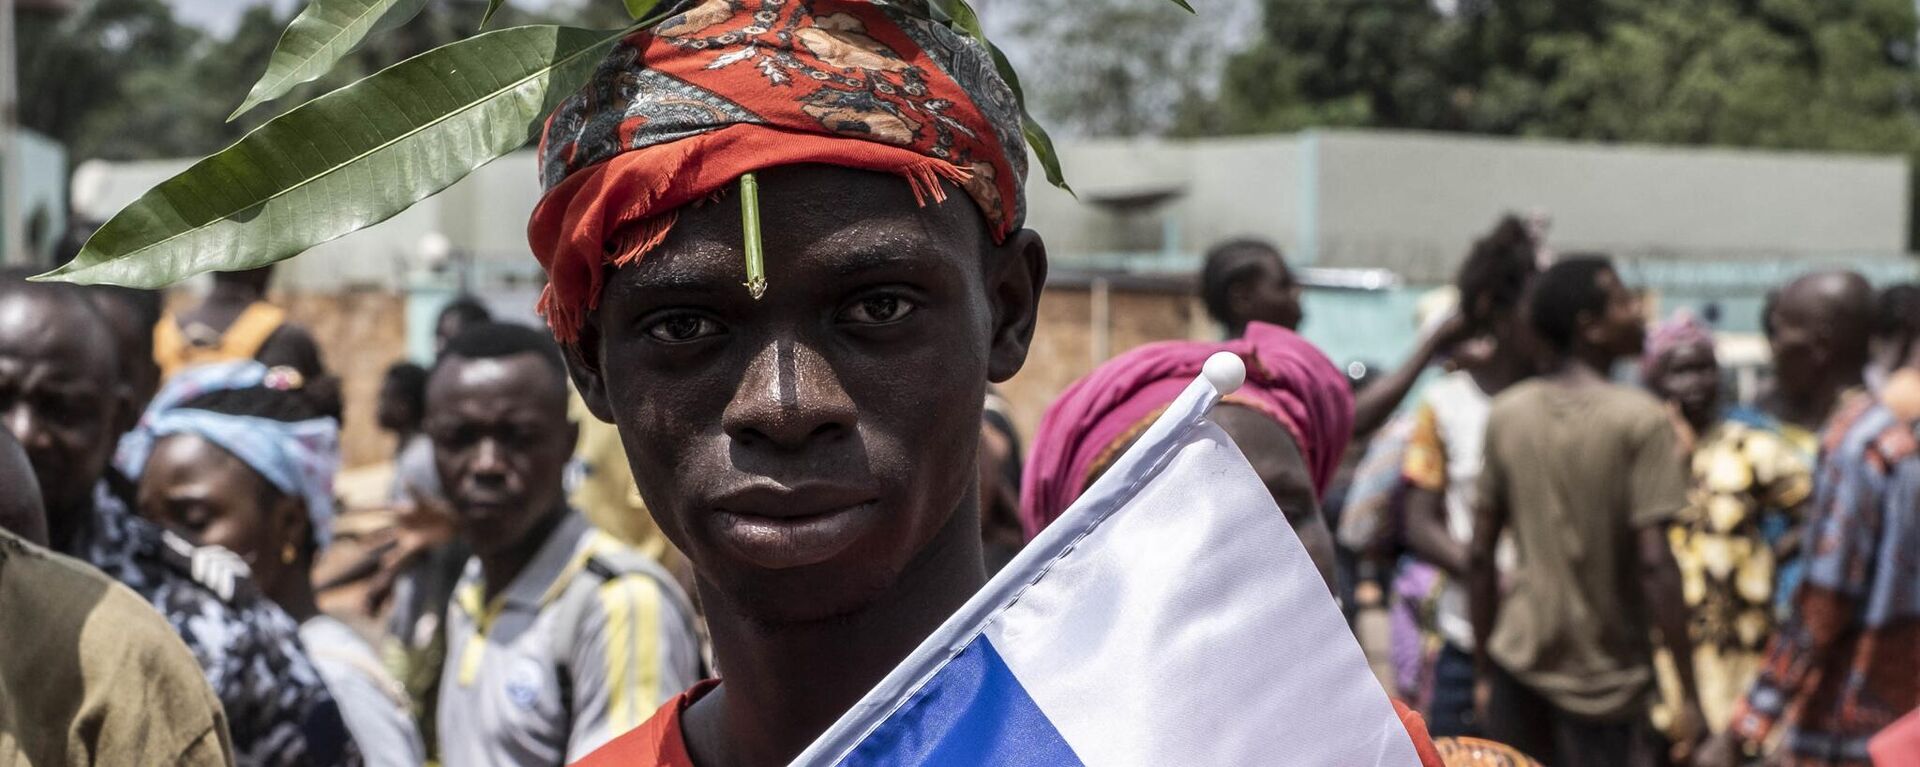 A demonstrator with foliage on to his head, a sign of compassion in Central African Republic, holds a Russian flag with the emblem of Russia on while posing for a portrait in Bangui, on March 22, 2023 during a march in support of Russia and China's presence in the Central African Republic. - Sputnik International, 1920, 26.03.2023